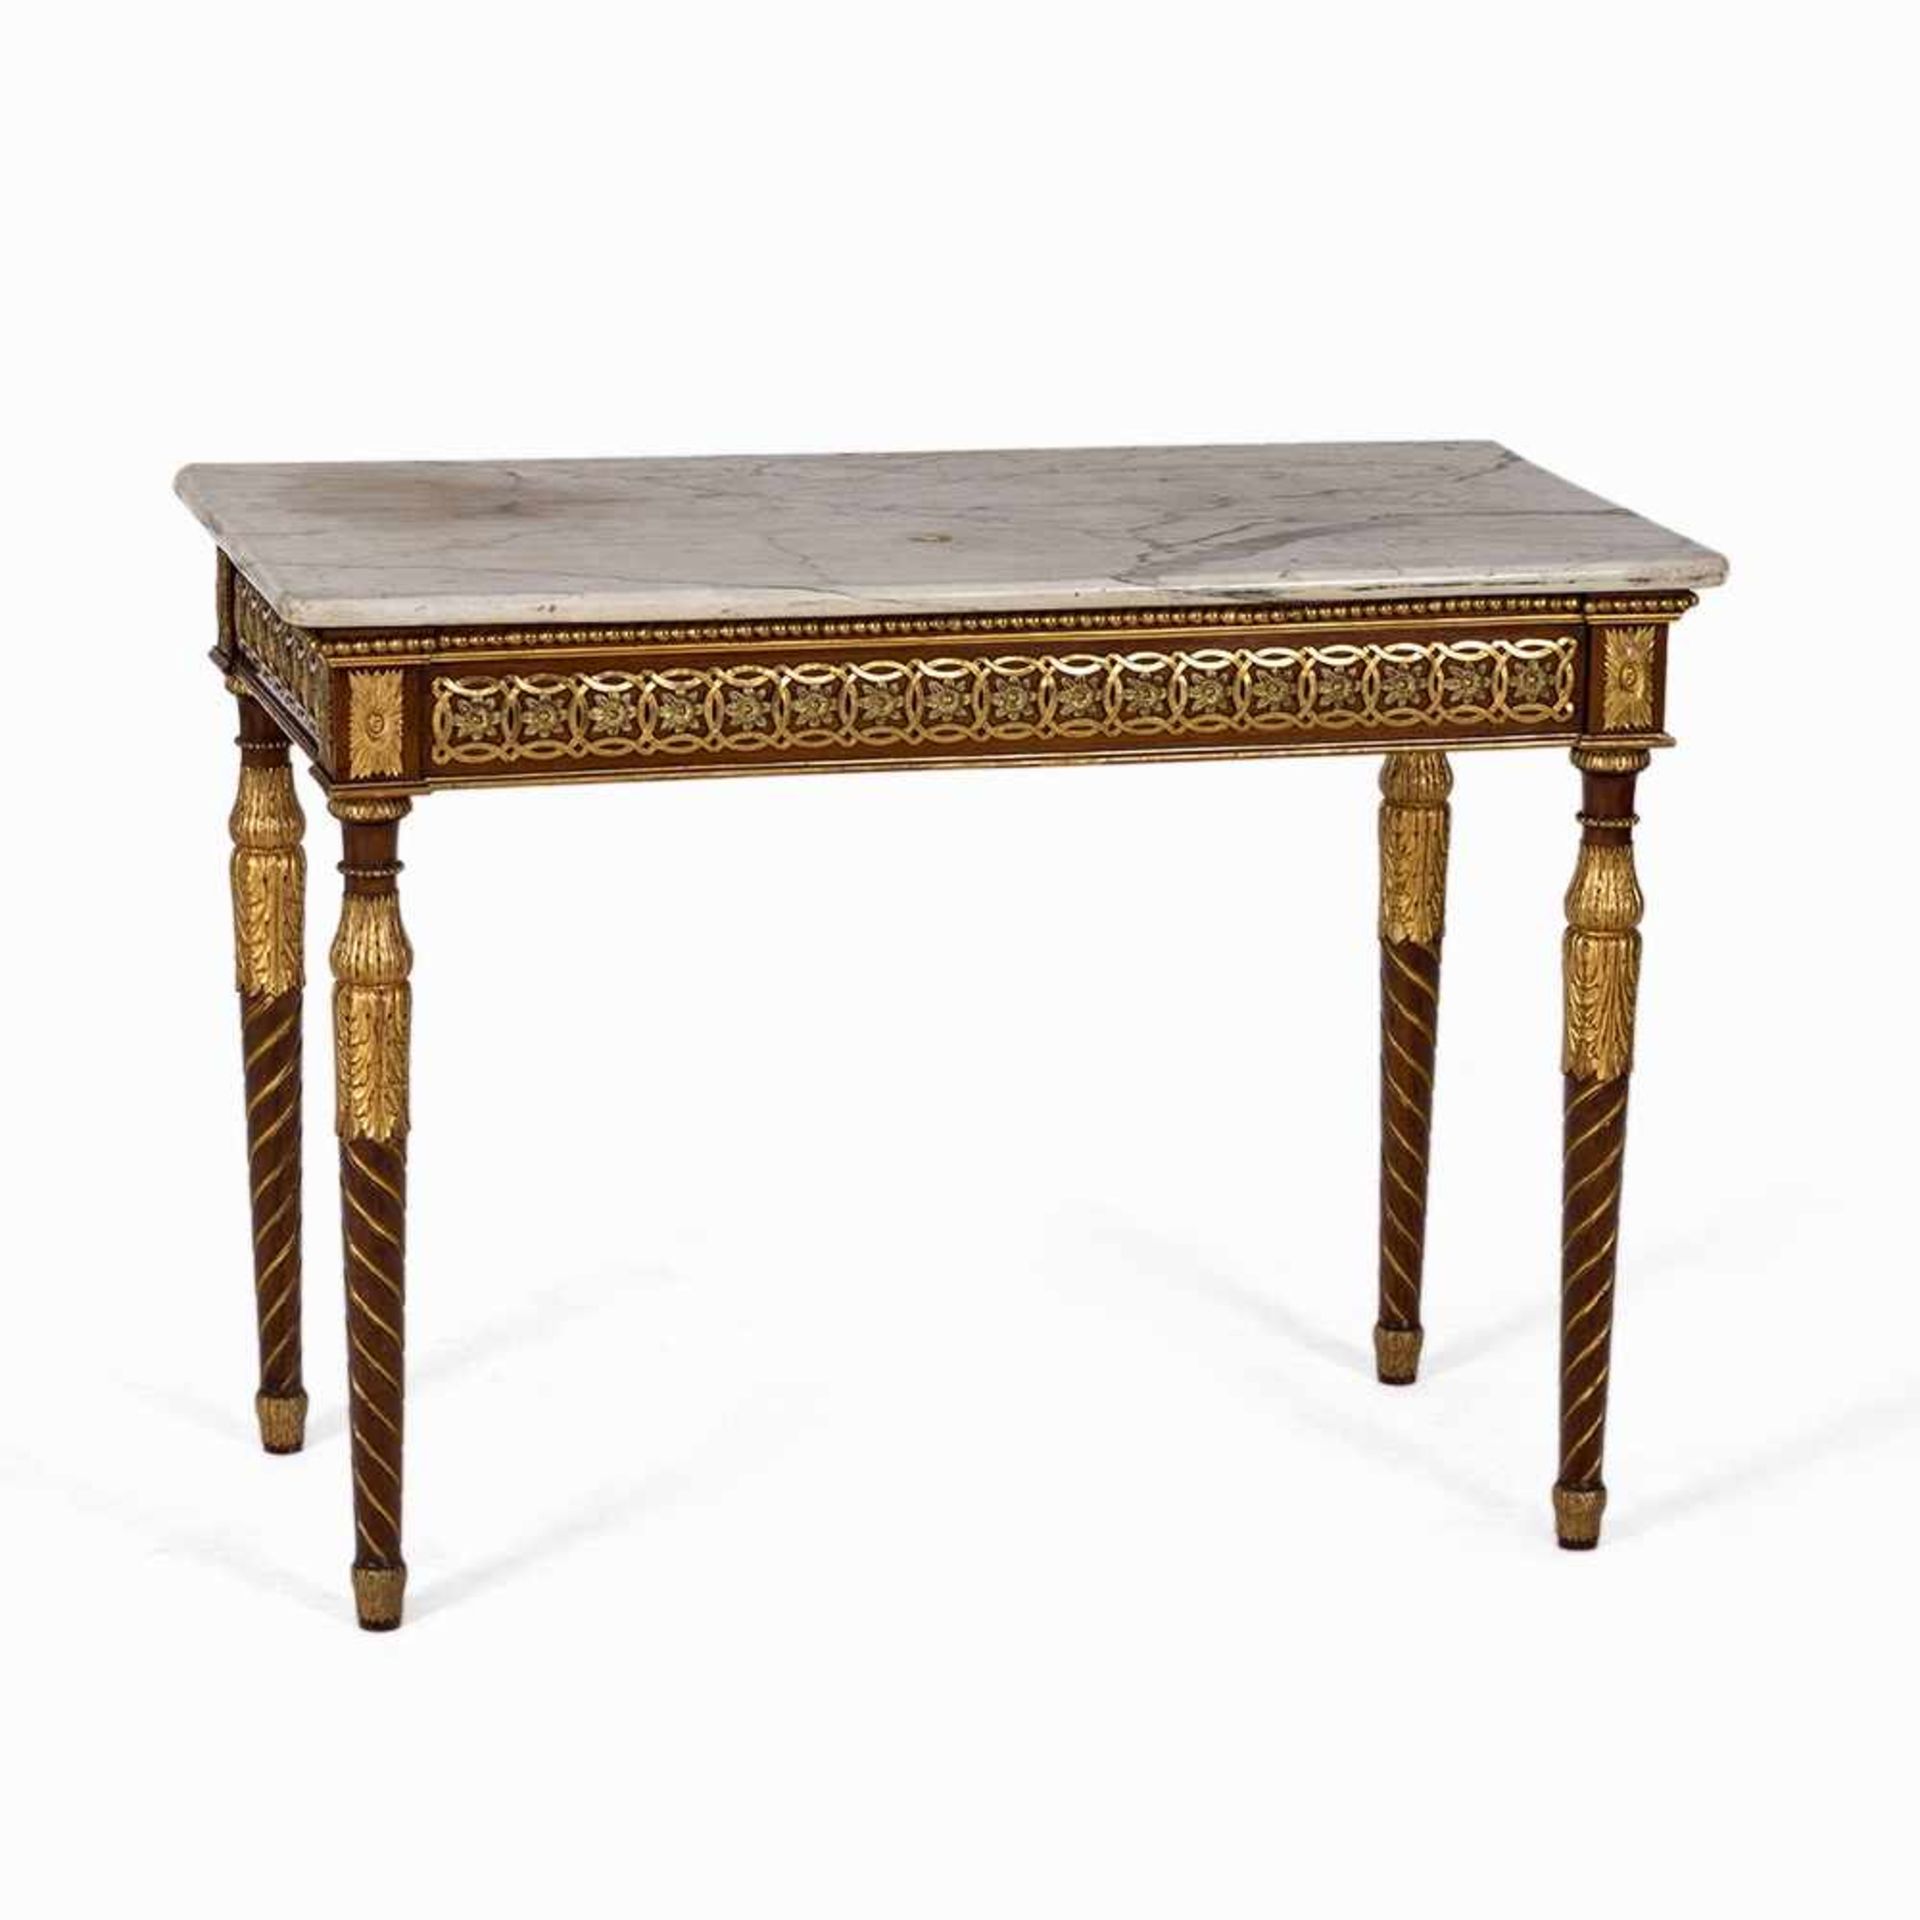 Neo-Classicism, Central Console Table, Spain, c. 1800 Neo-Classicism, period of Charles IV of - Bild 10 aus 10